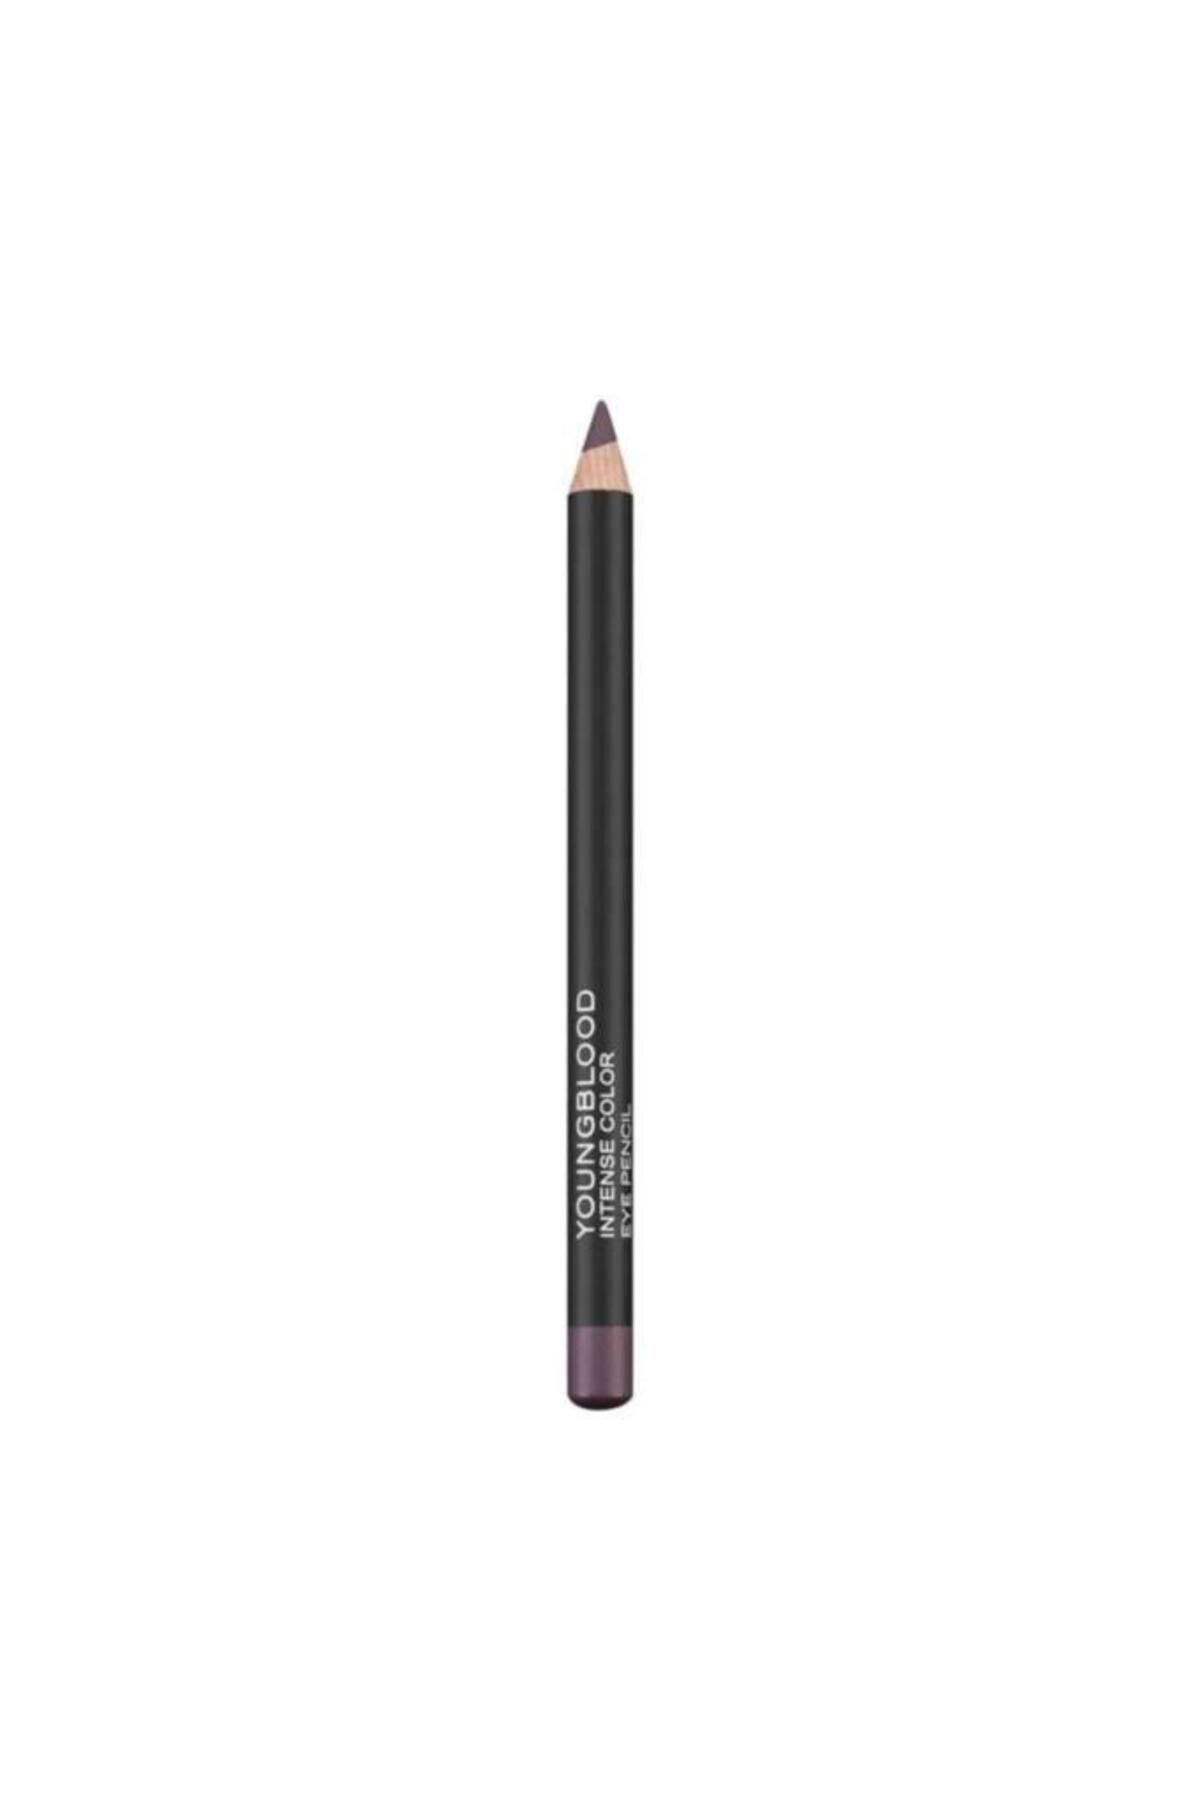 Youngblood Youngblood Eye Liner Pencil 1.1 Gr. - Passion